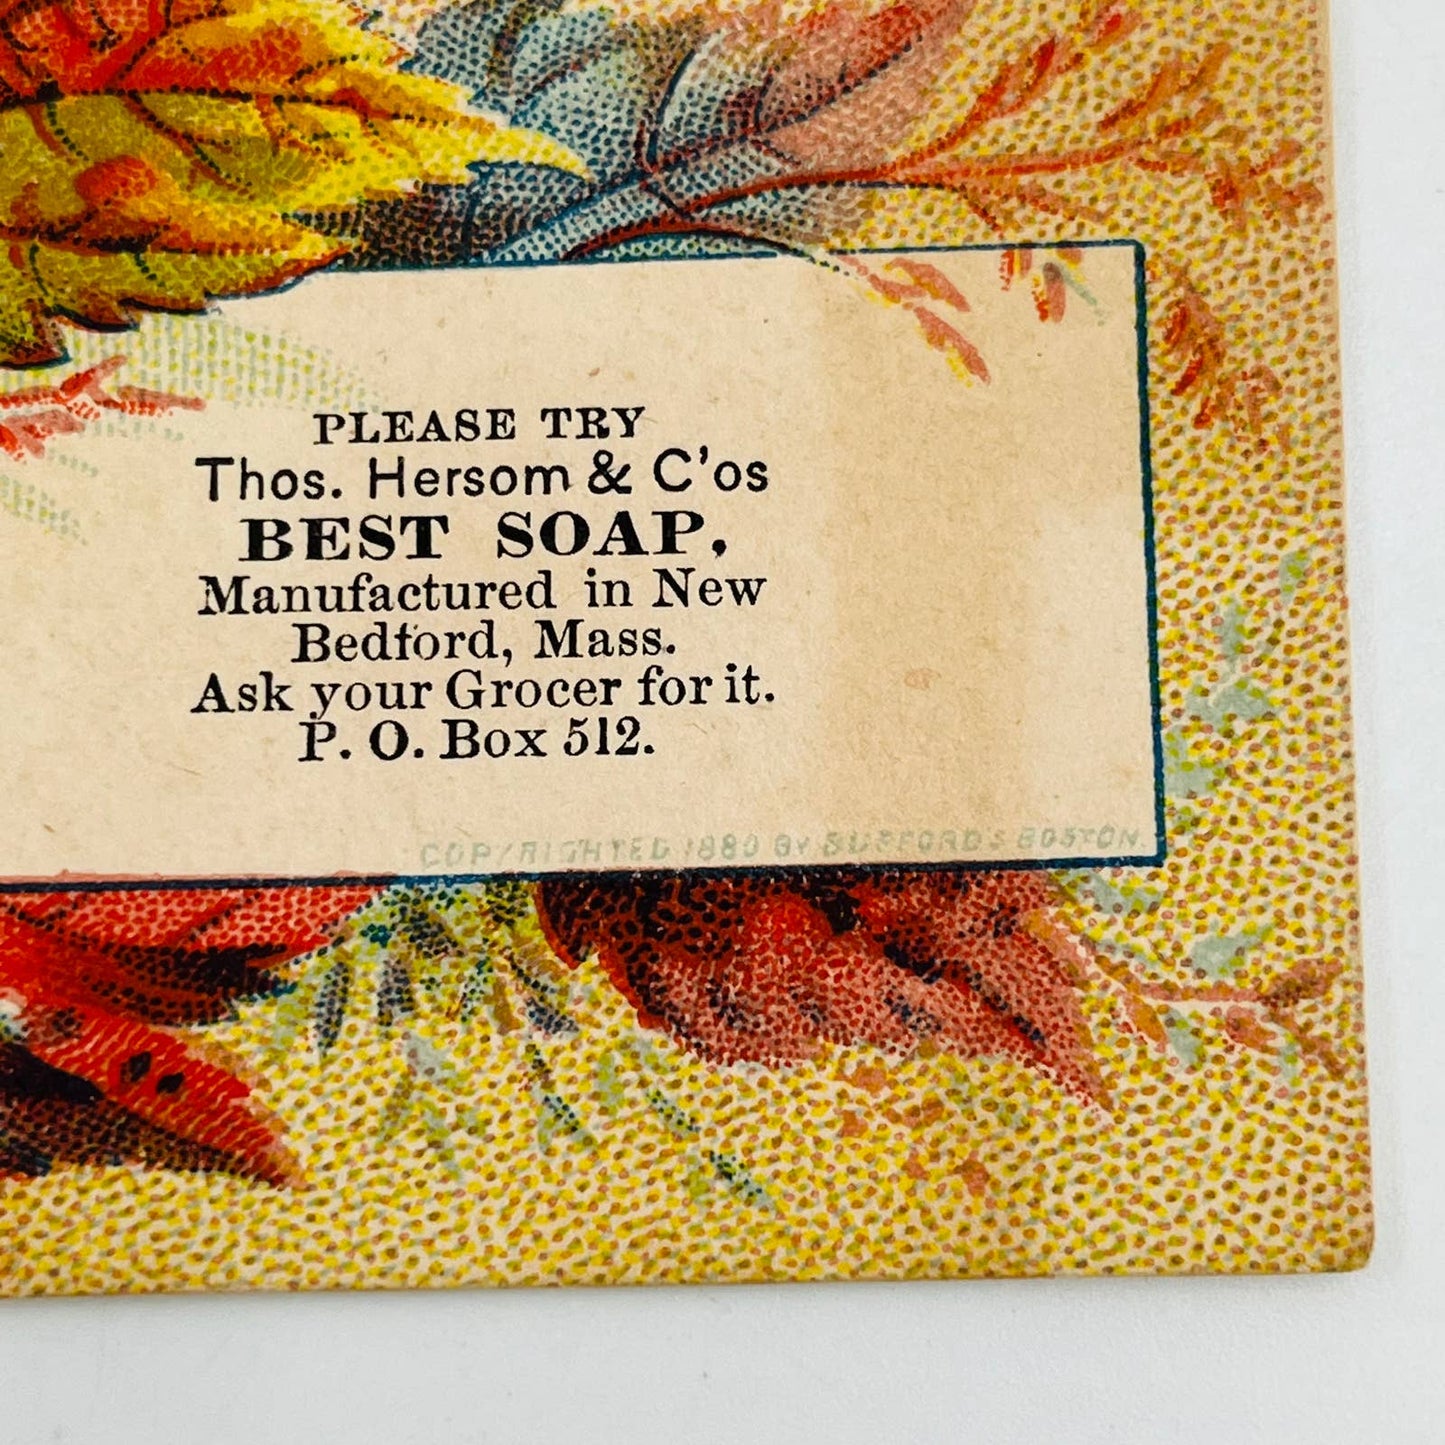 1880 Victorian Trade Card Autumn Thos. Hersom & C’os BEST SOAP Bedford Mass. AA2